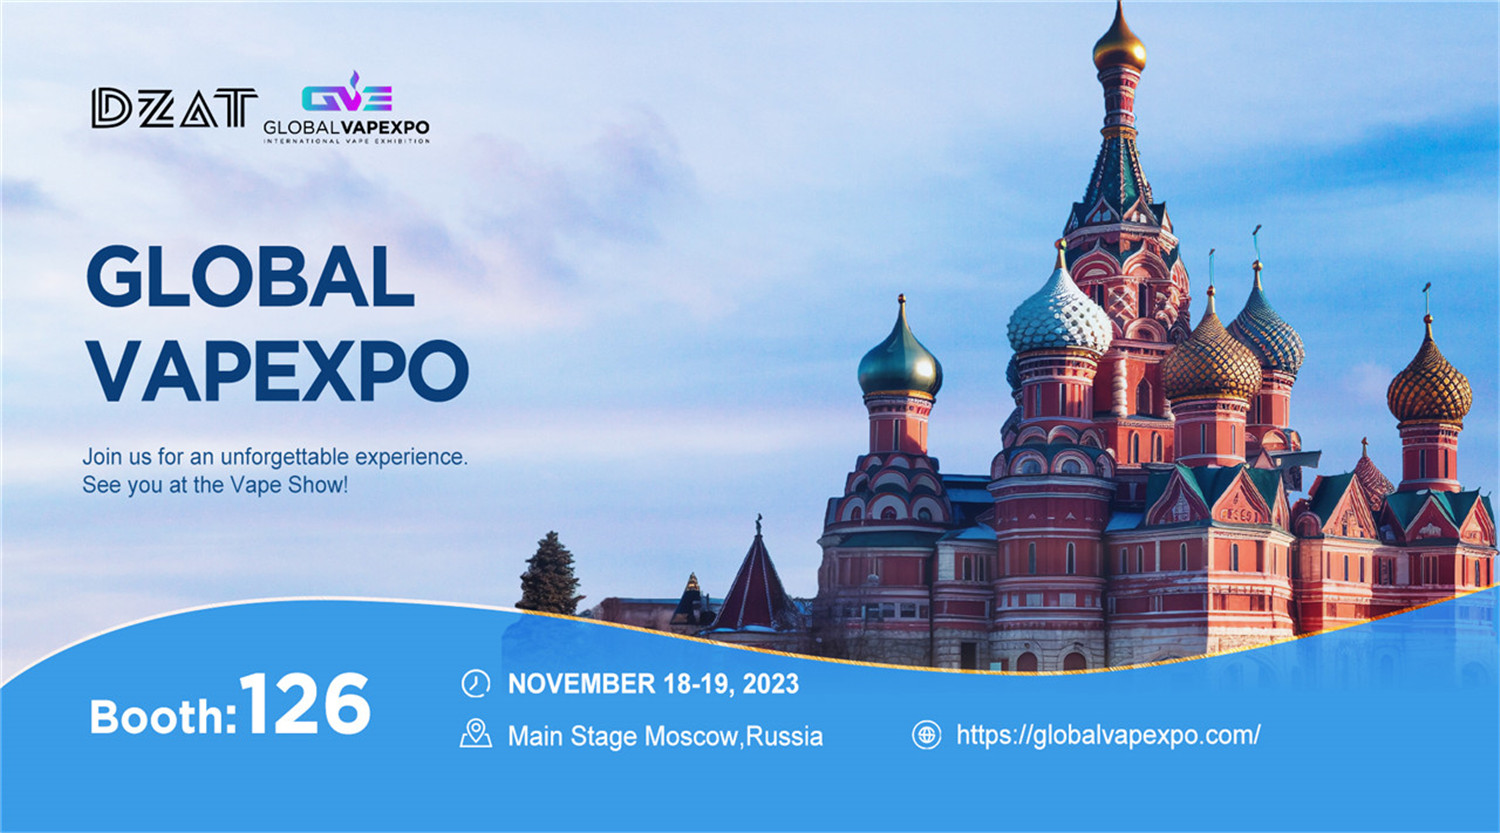 We Invite You to Visit DZAT booth #126 at Global Vapexpo Russia 2023!